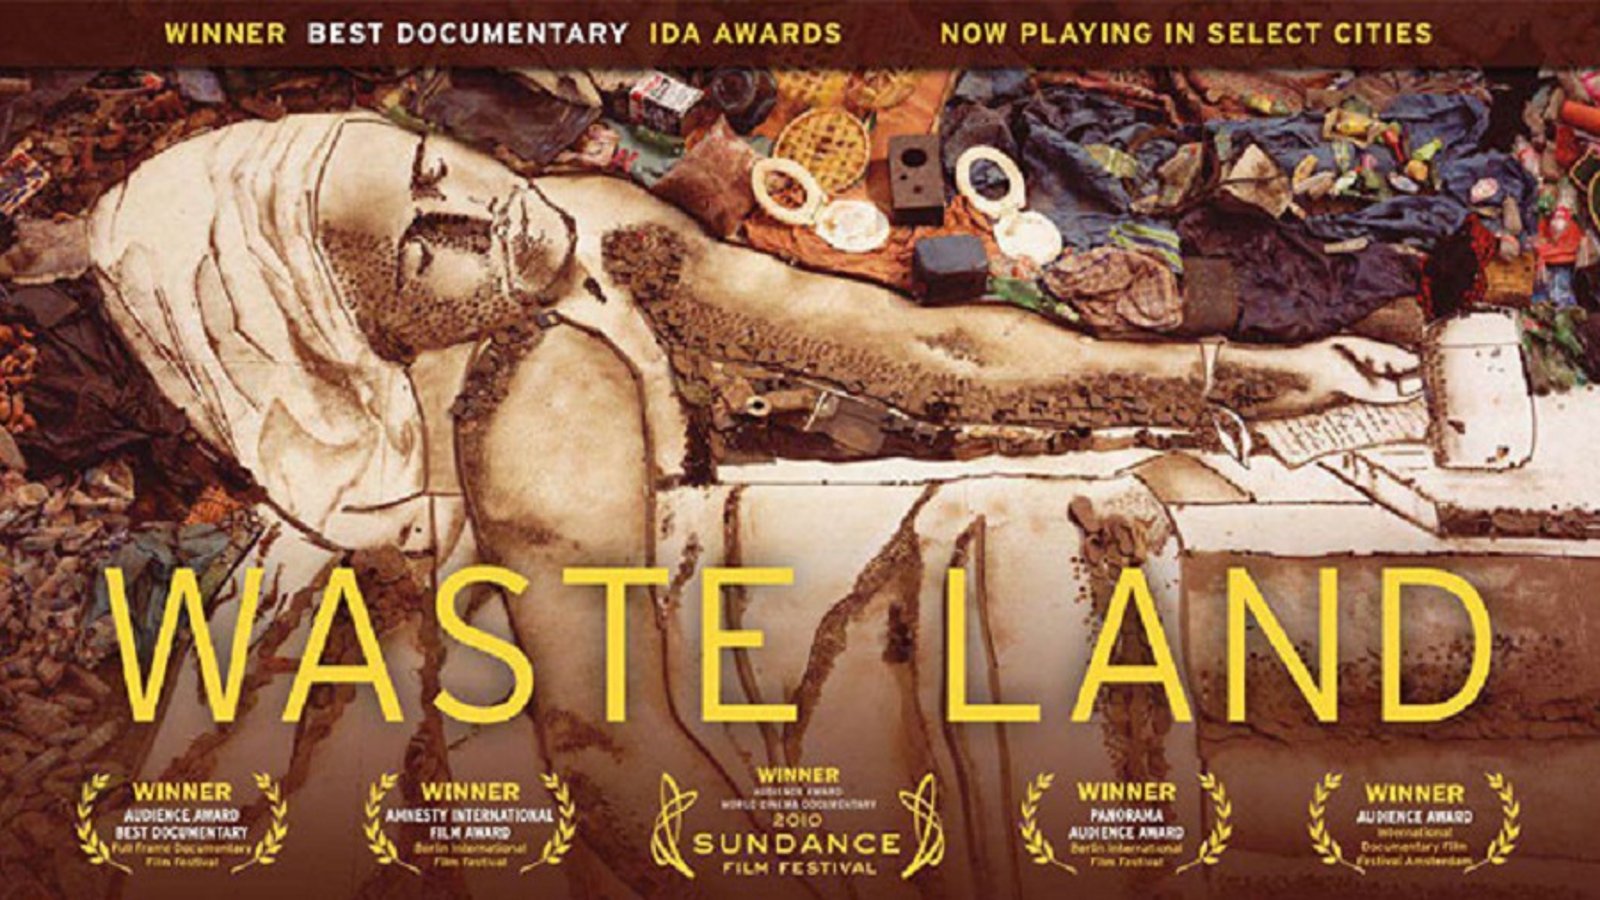 Waste Land - An Art Collaboration in the World’s Largest Garbage Dump